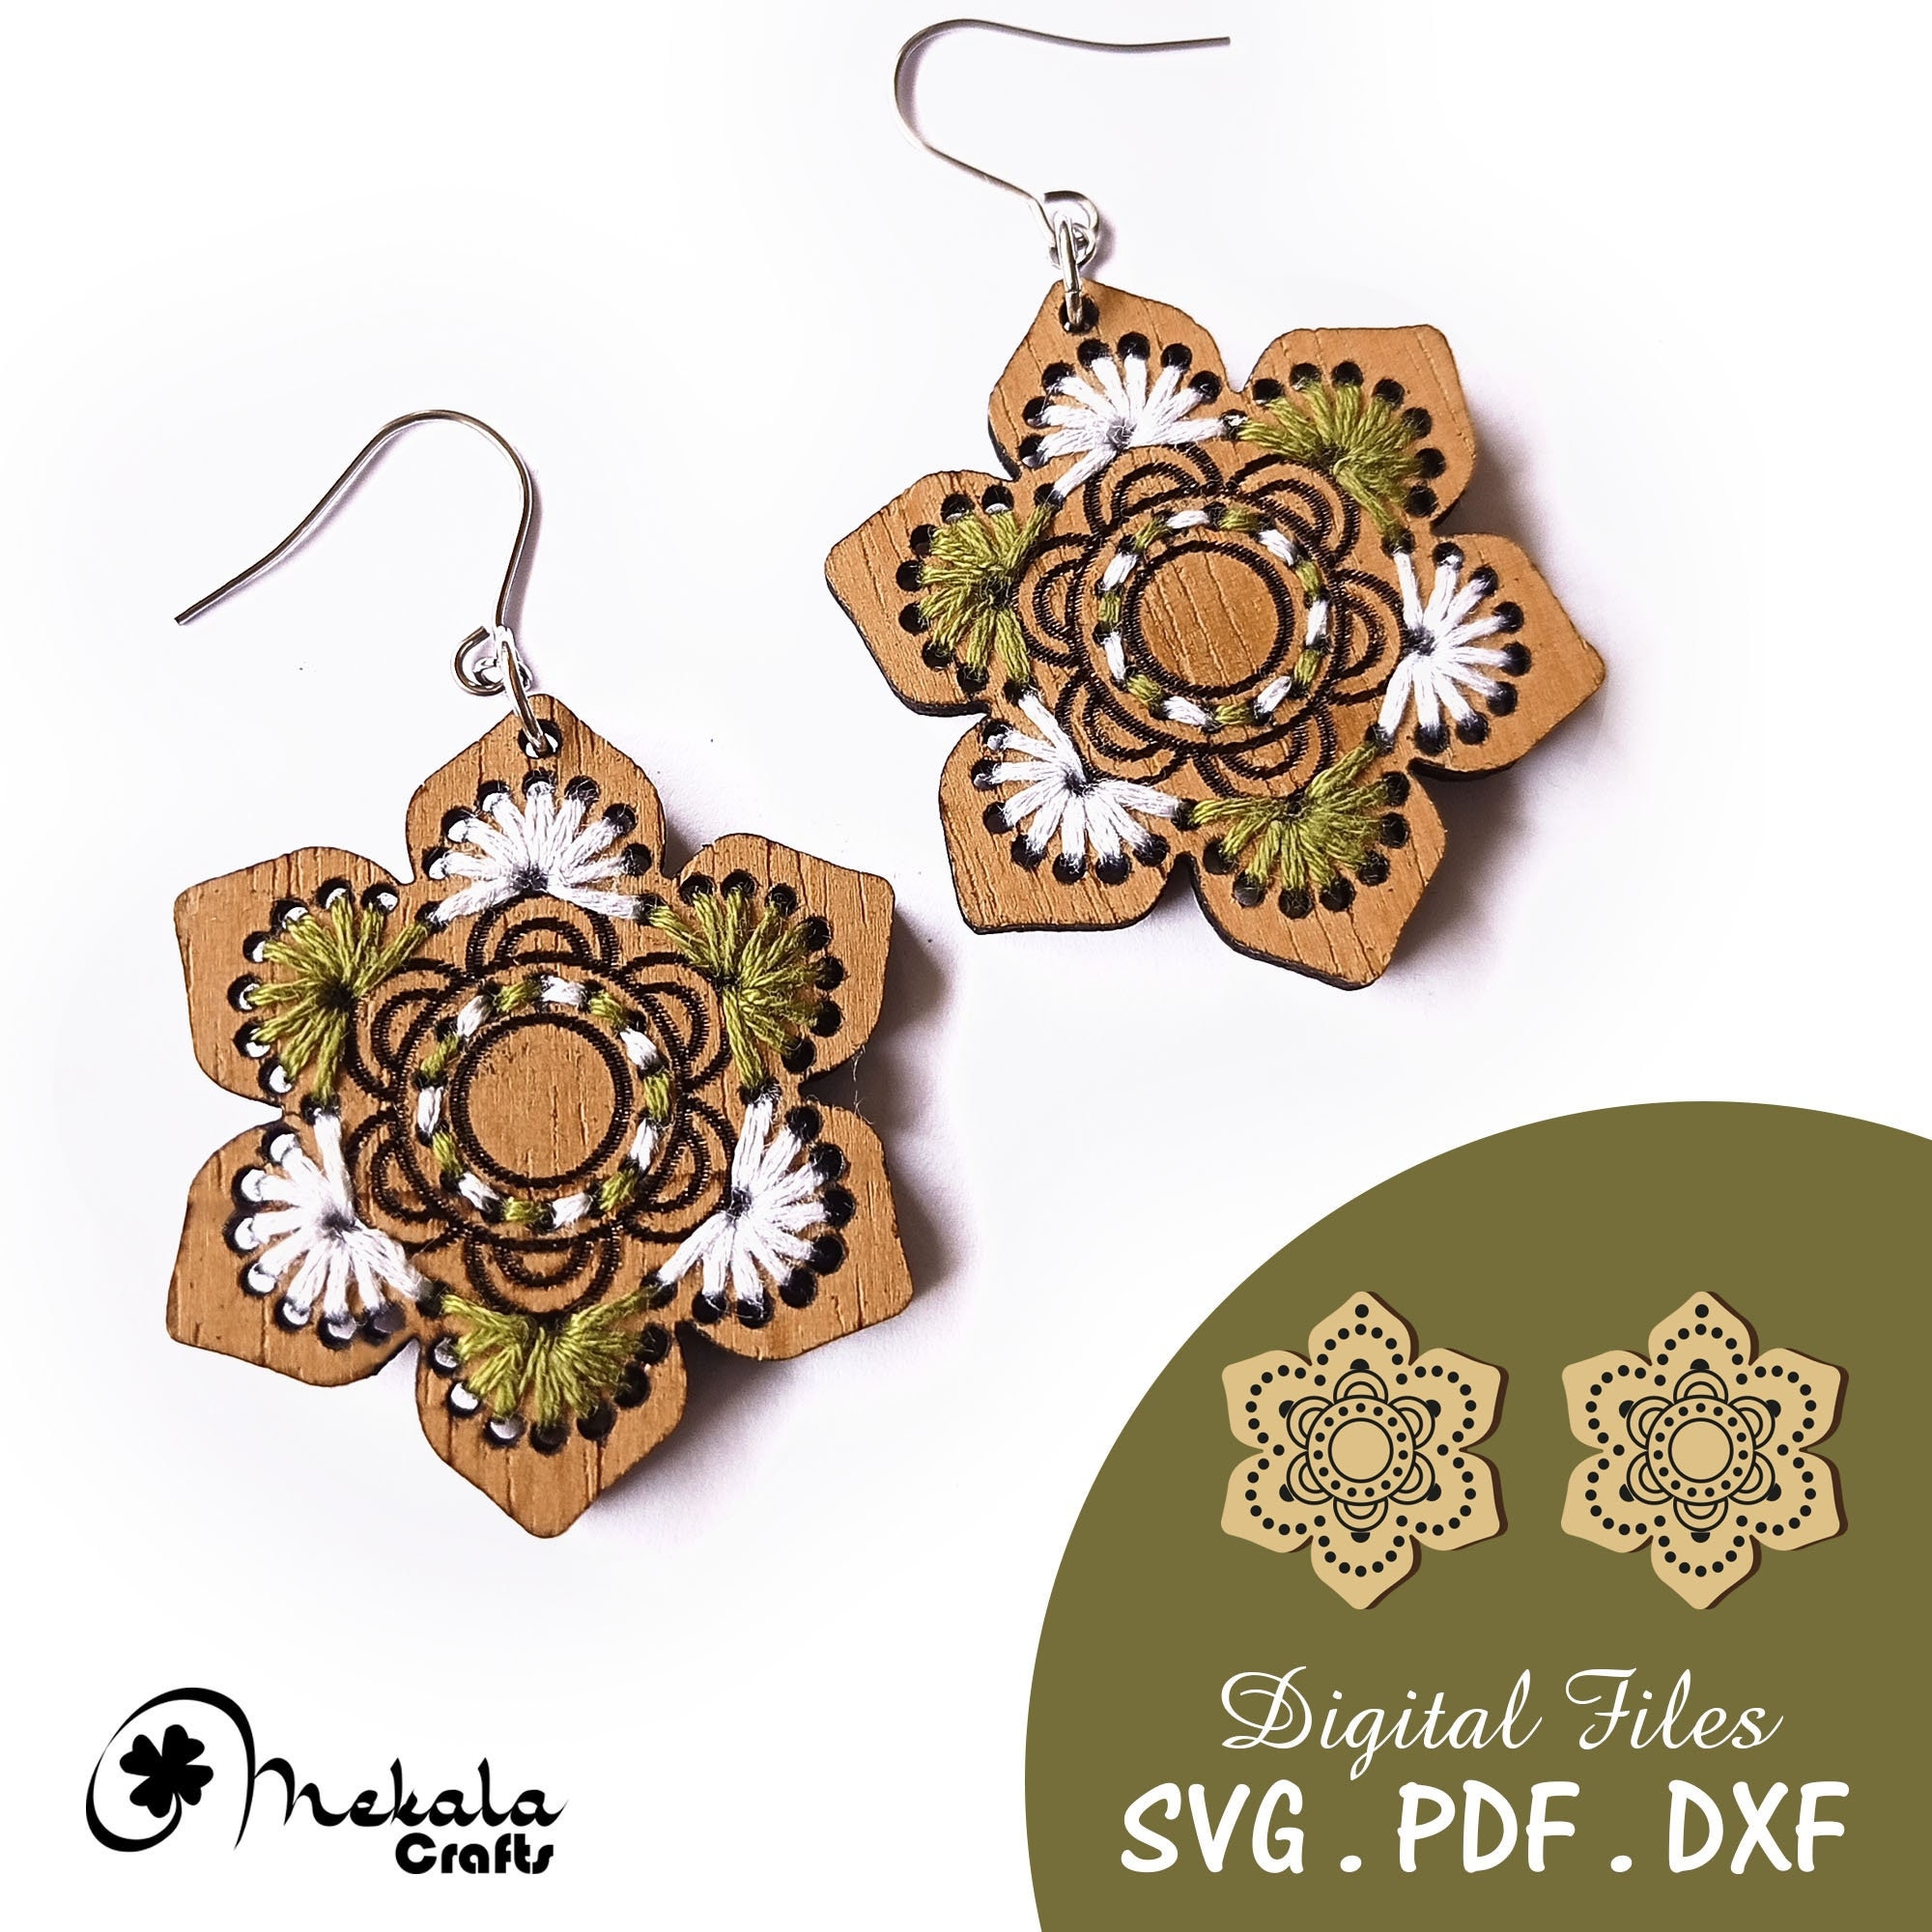 DIY Embroidery Earrings Gift (including DIY Materials) 3cm-3.5cm / Wihtout Frame